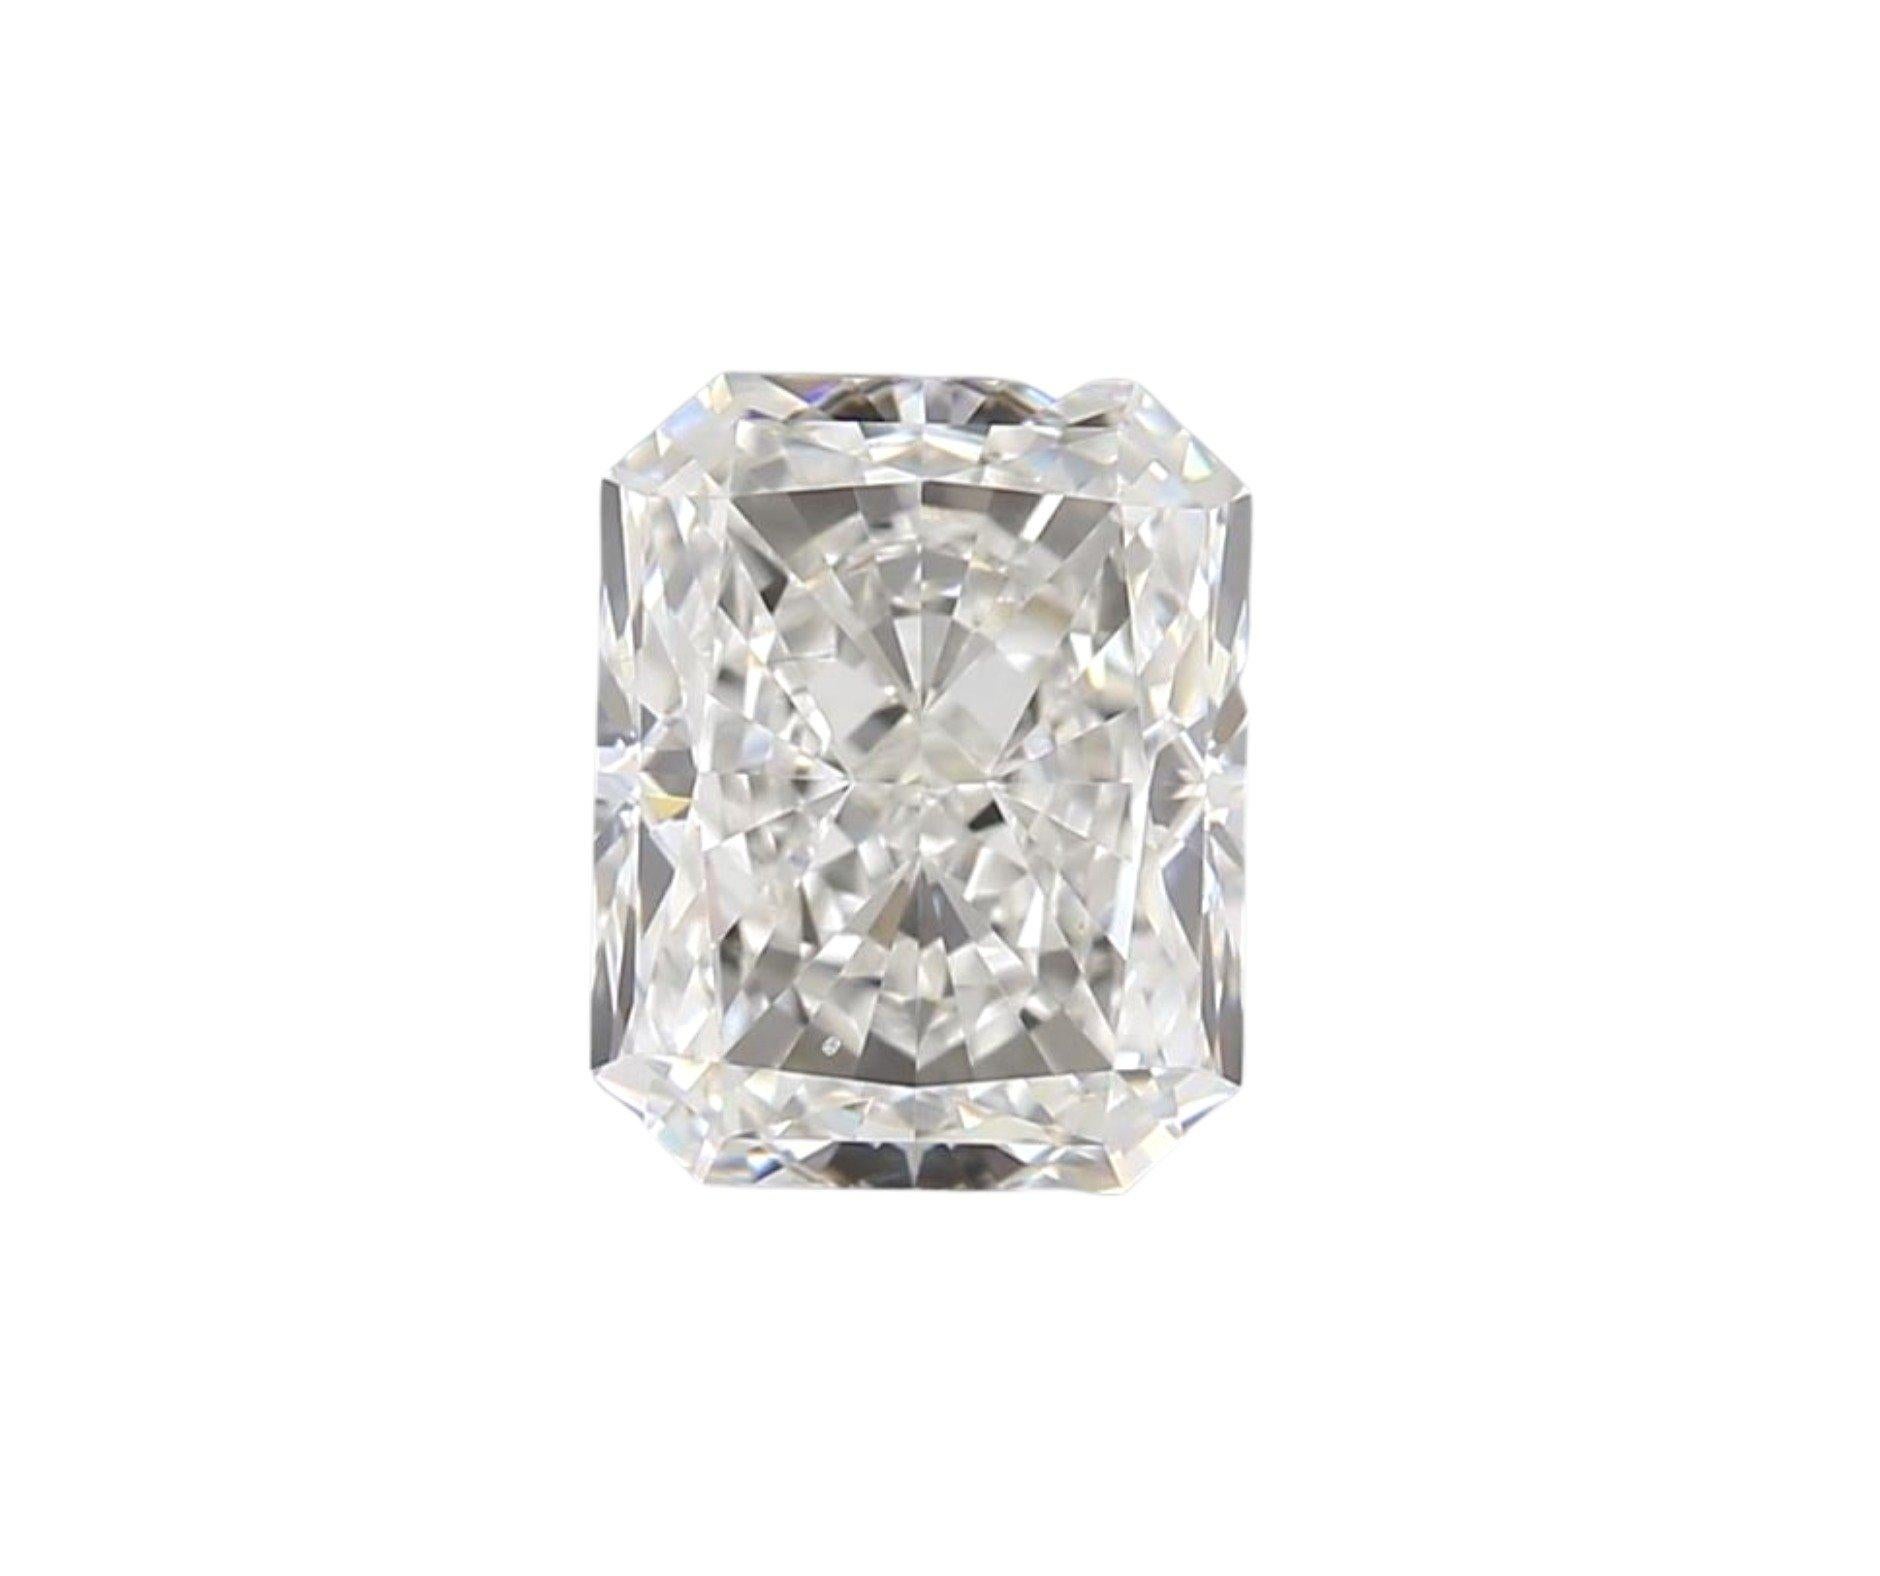 Amazing Natural radiant cut diamond in a 0.92 carat F VS2 graded by IGI Laboratory with beautiful cut and shine. This diamond comes with an IGI Certificate sealed in a security blister and laser inscription number.

IGI 537236396

Sku: KA-050